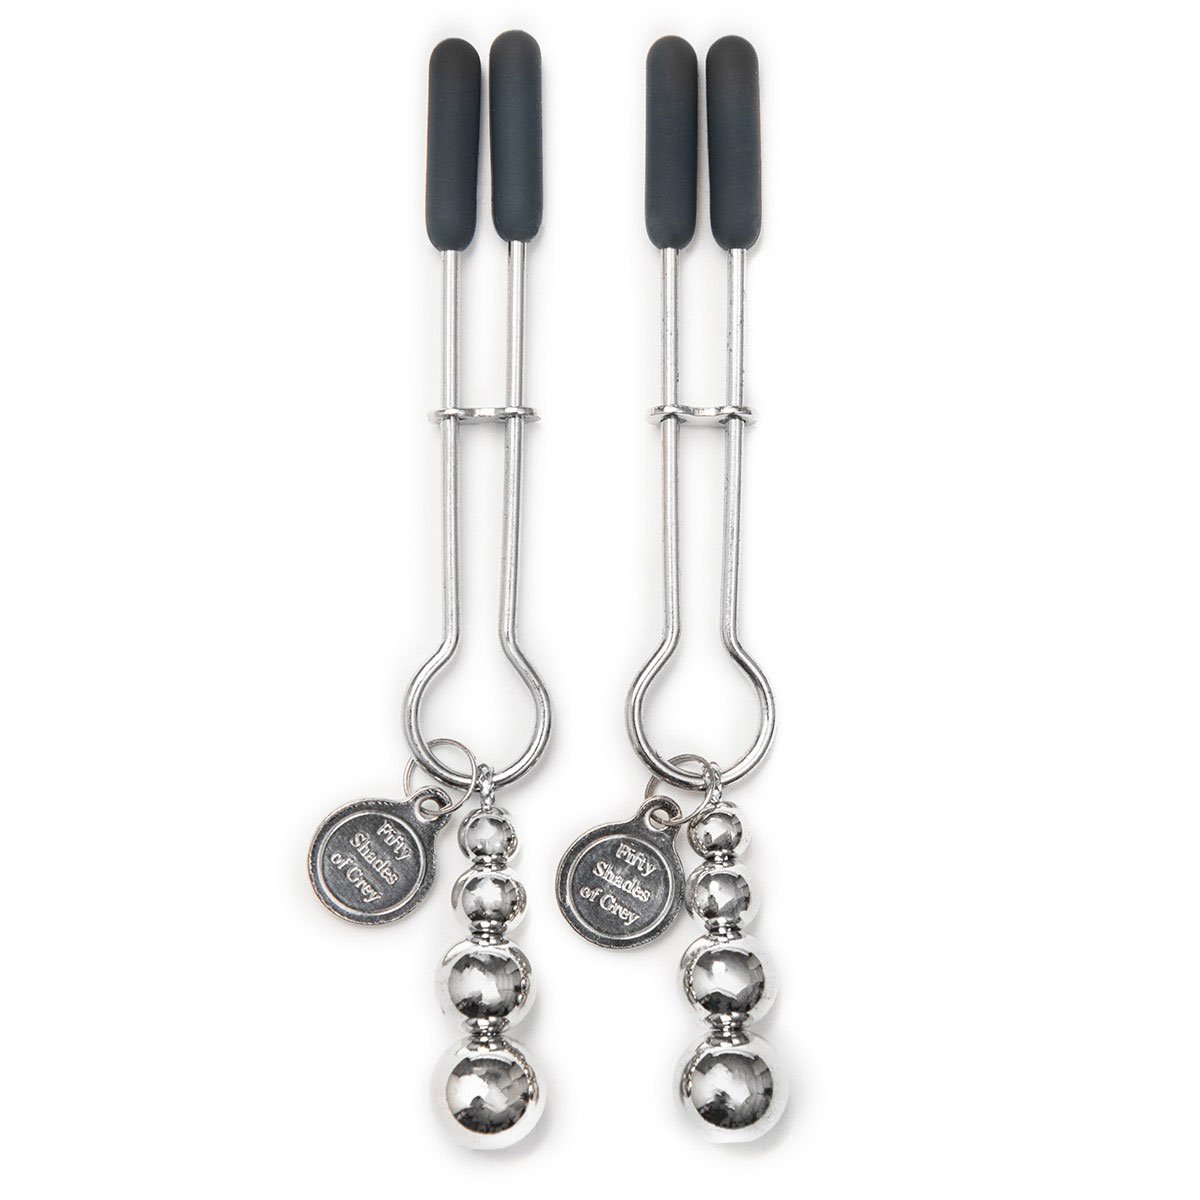 Fifty Shades The Pinch Nipple Clamps - Buy At Luxury Toy X - Free 3-Day Shipping